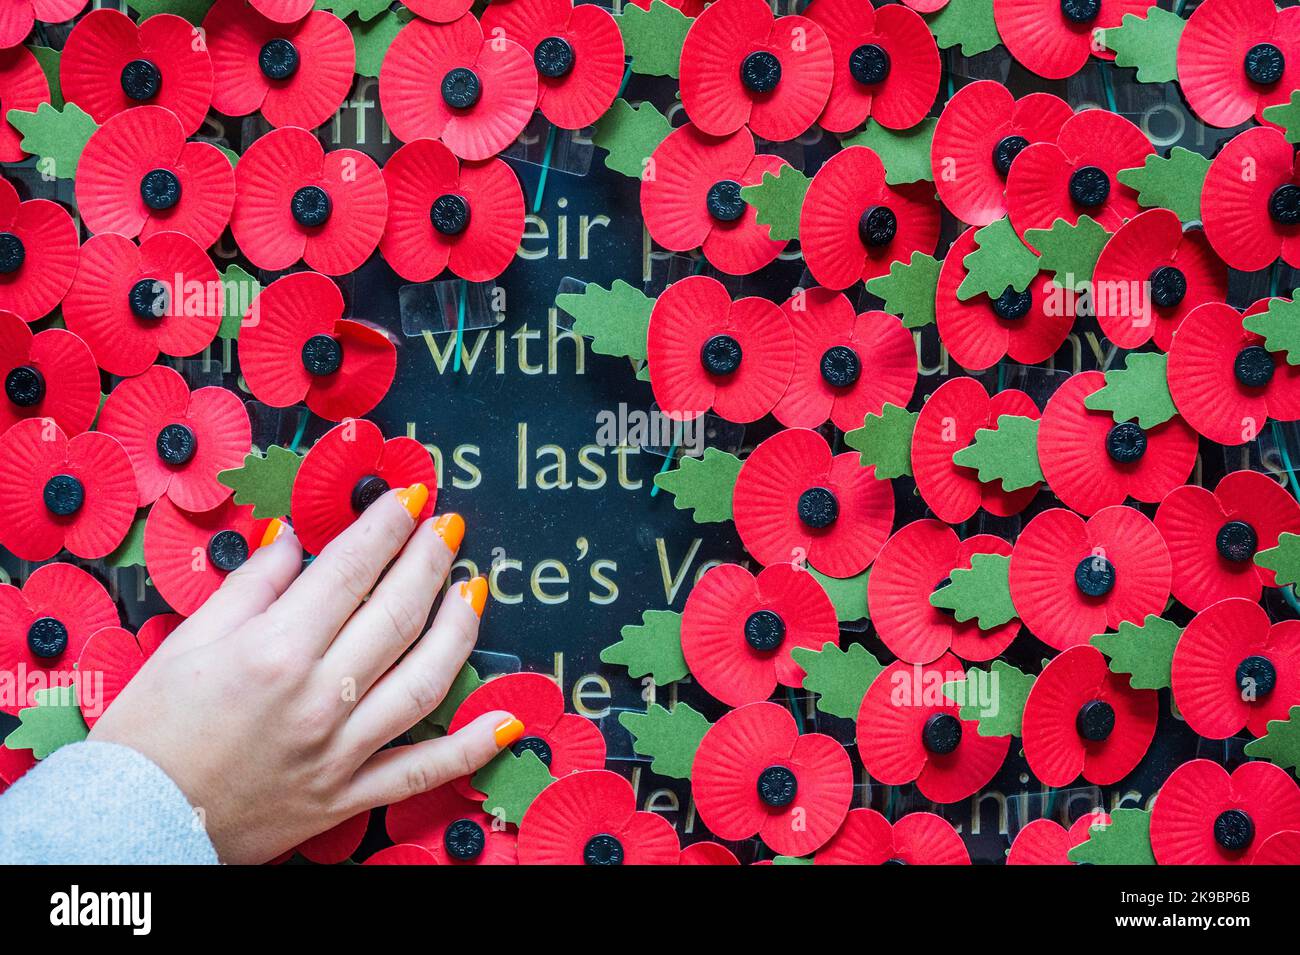 London, UK. 27 Oct 2022. Visitors of all ages Enjoy peeling off the poppies - The Royal British Legion's Poppy Appeal 2022 launches with a 6-metre-wide wall of poppies featuring stories of veterans, RBL beneficiaries (many having received lifechanging support) and their families - the people behind the poppy. Members of the public were invited to take a paper poppy from the wall to uncover the stories. The charity is urging people to wear a poppy this year to show that they care and that the service and sacrifice of serving personnel, veterans and their families will never be forgotten. Credit Stock Photo